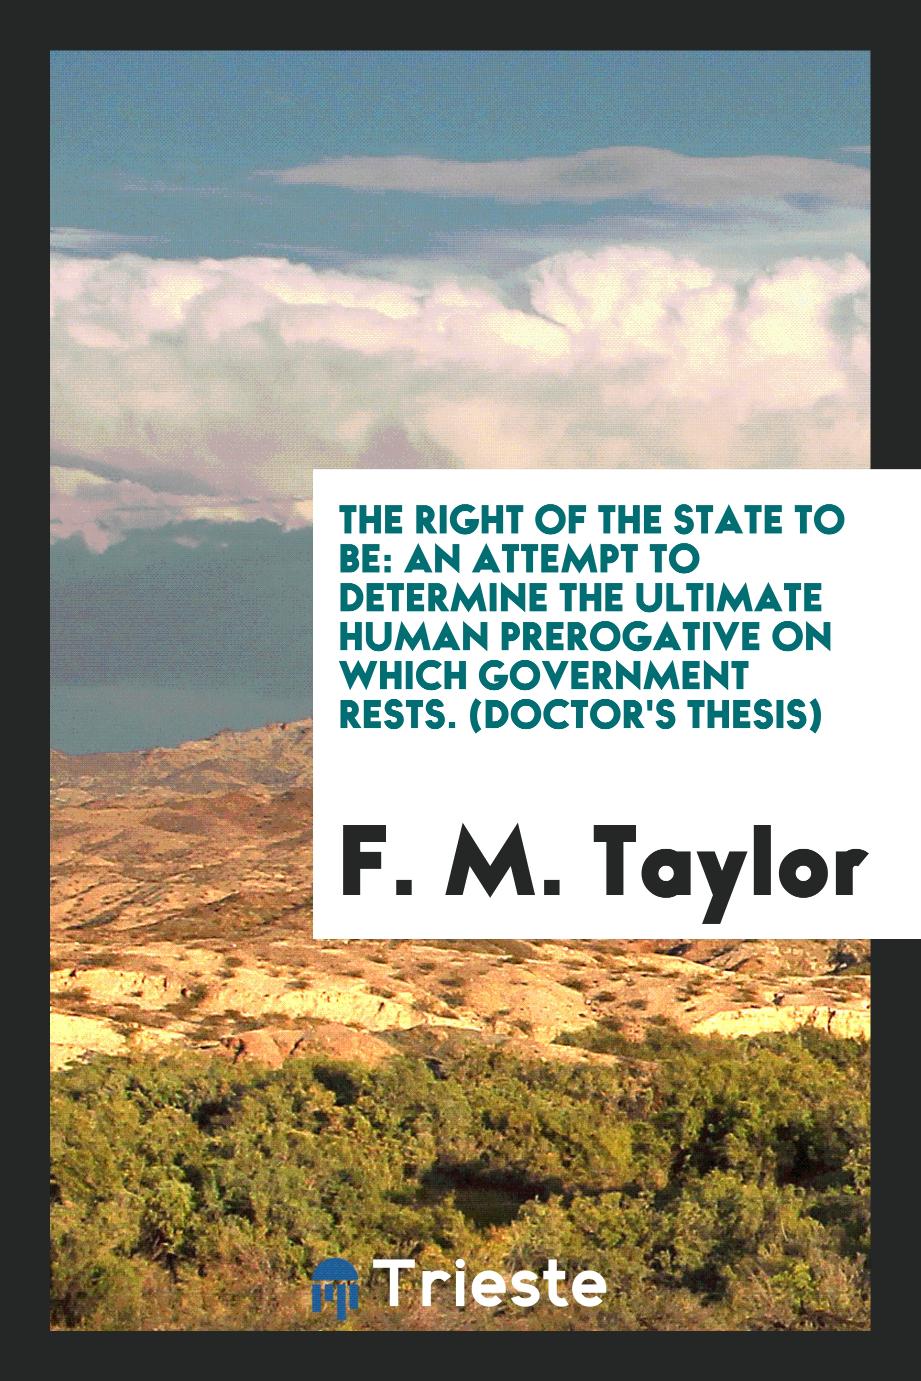 The Right of the State to Be: An Attempt to Determine the Ultimate Human Prerogative on Which Government Rests. (Doctor's Thesis)